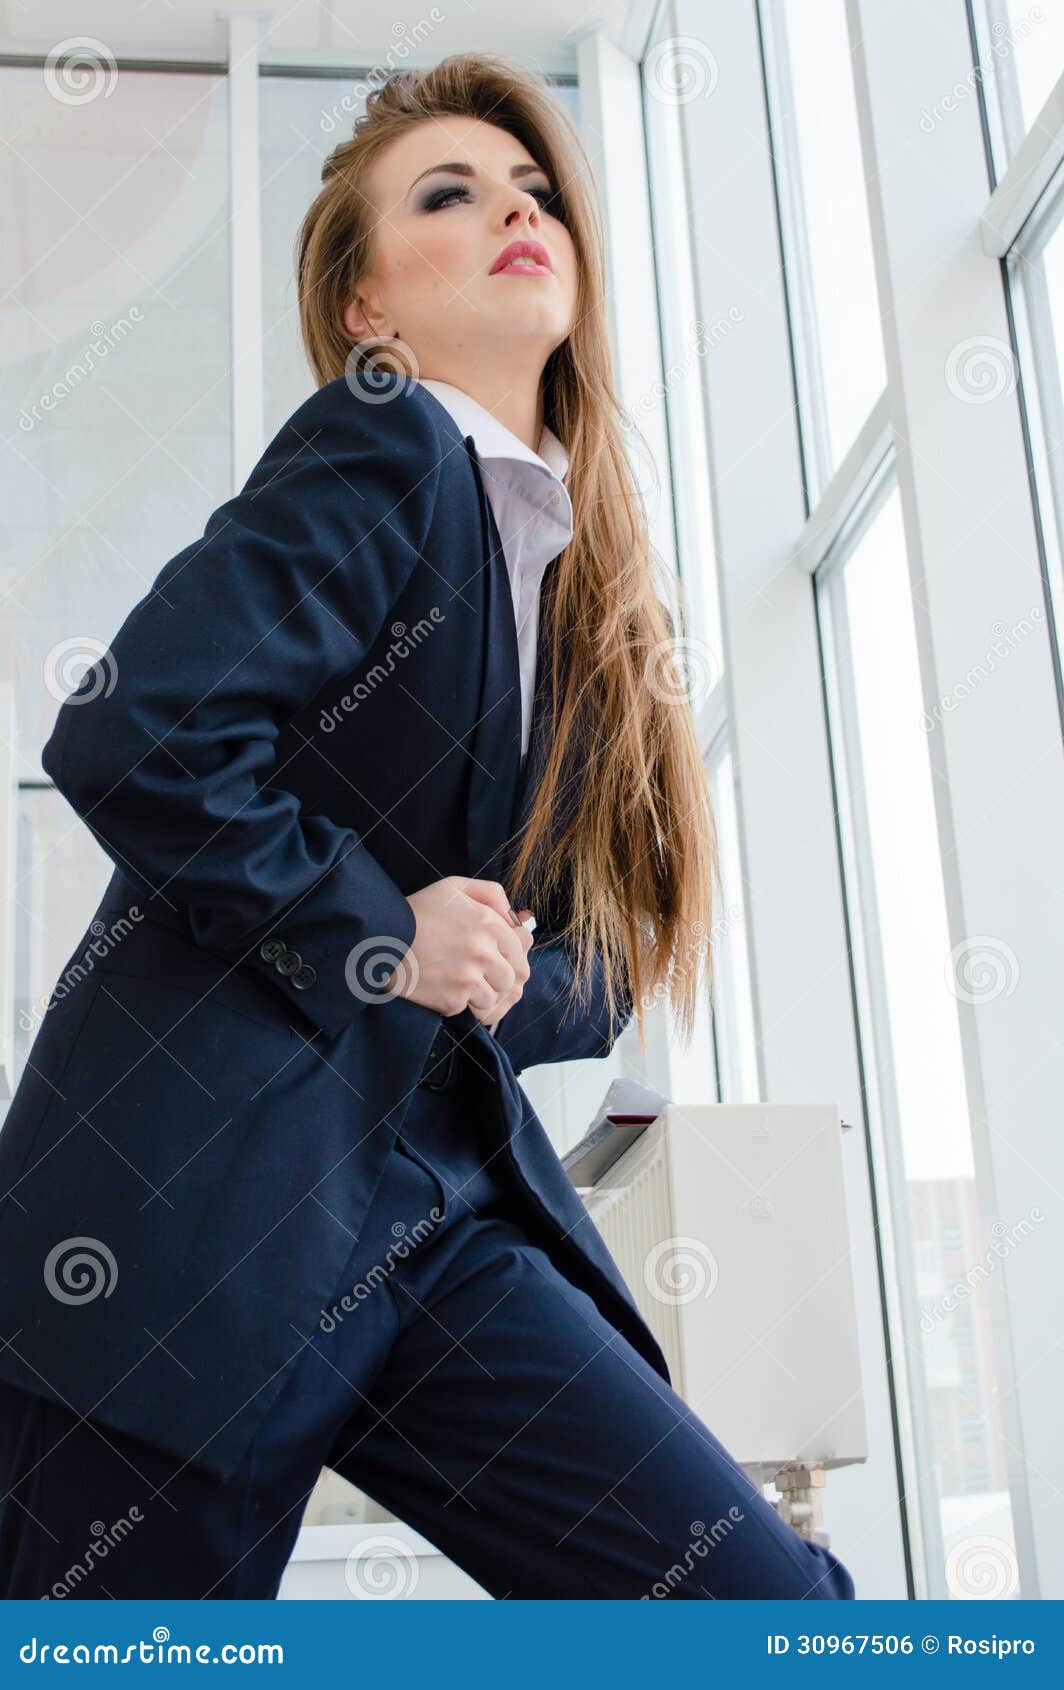 Young Pretty Business Woman Wearing Man's Suit In Office Stock Photo ...